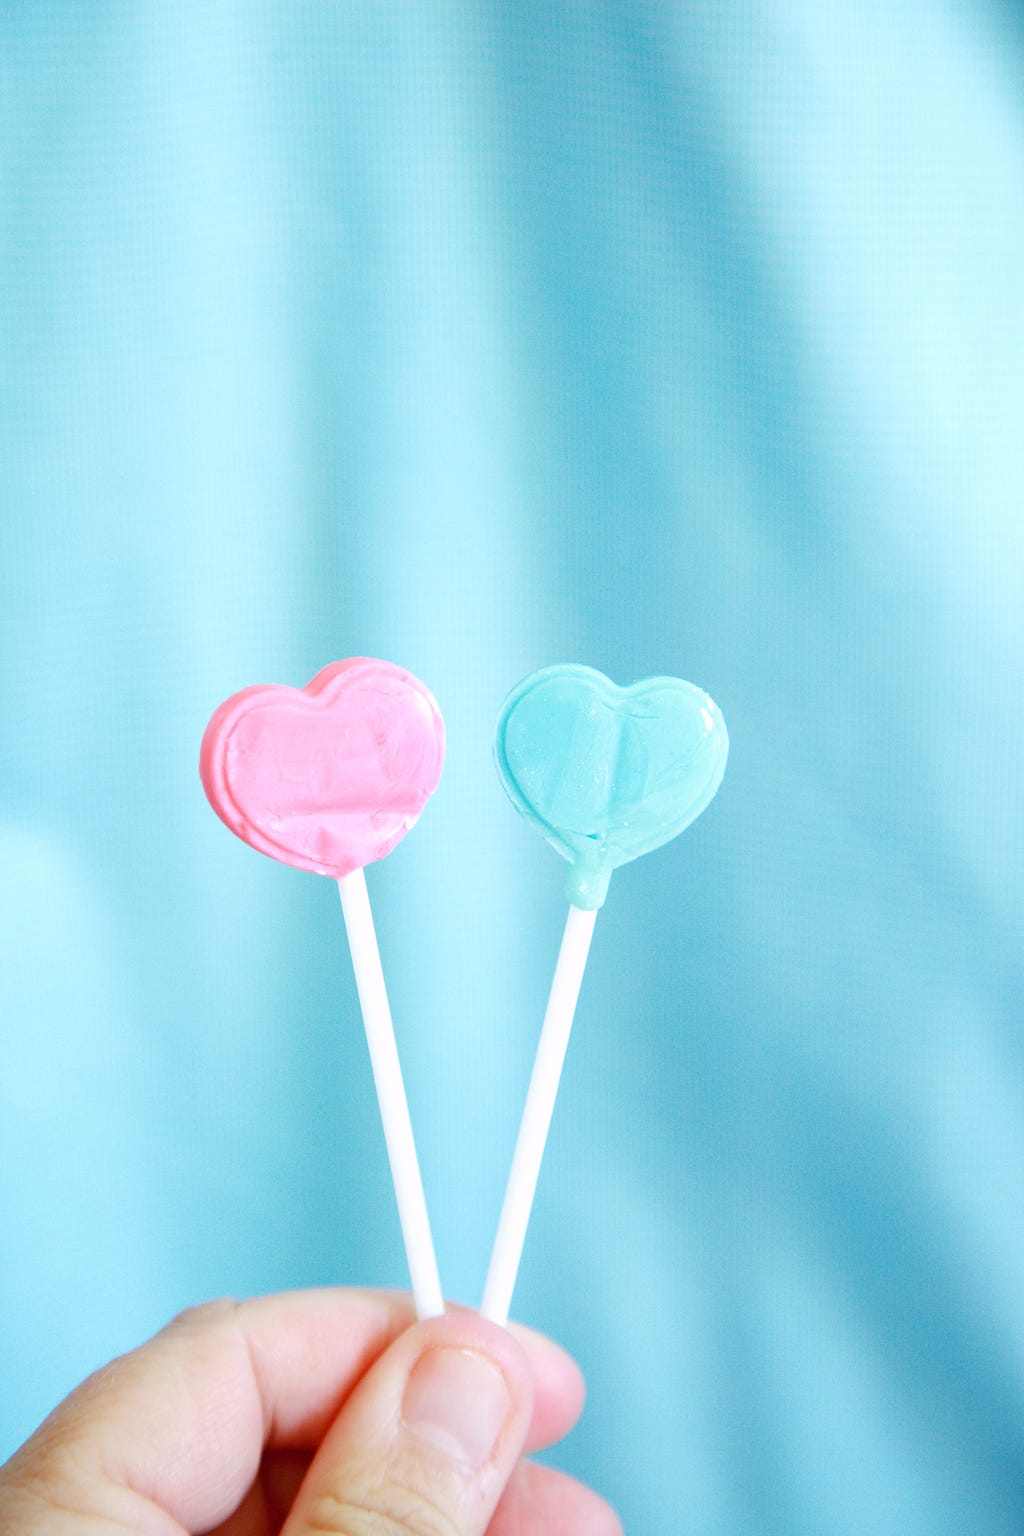 Two lollipops. One blue, one pink against a blue fabric background.